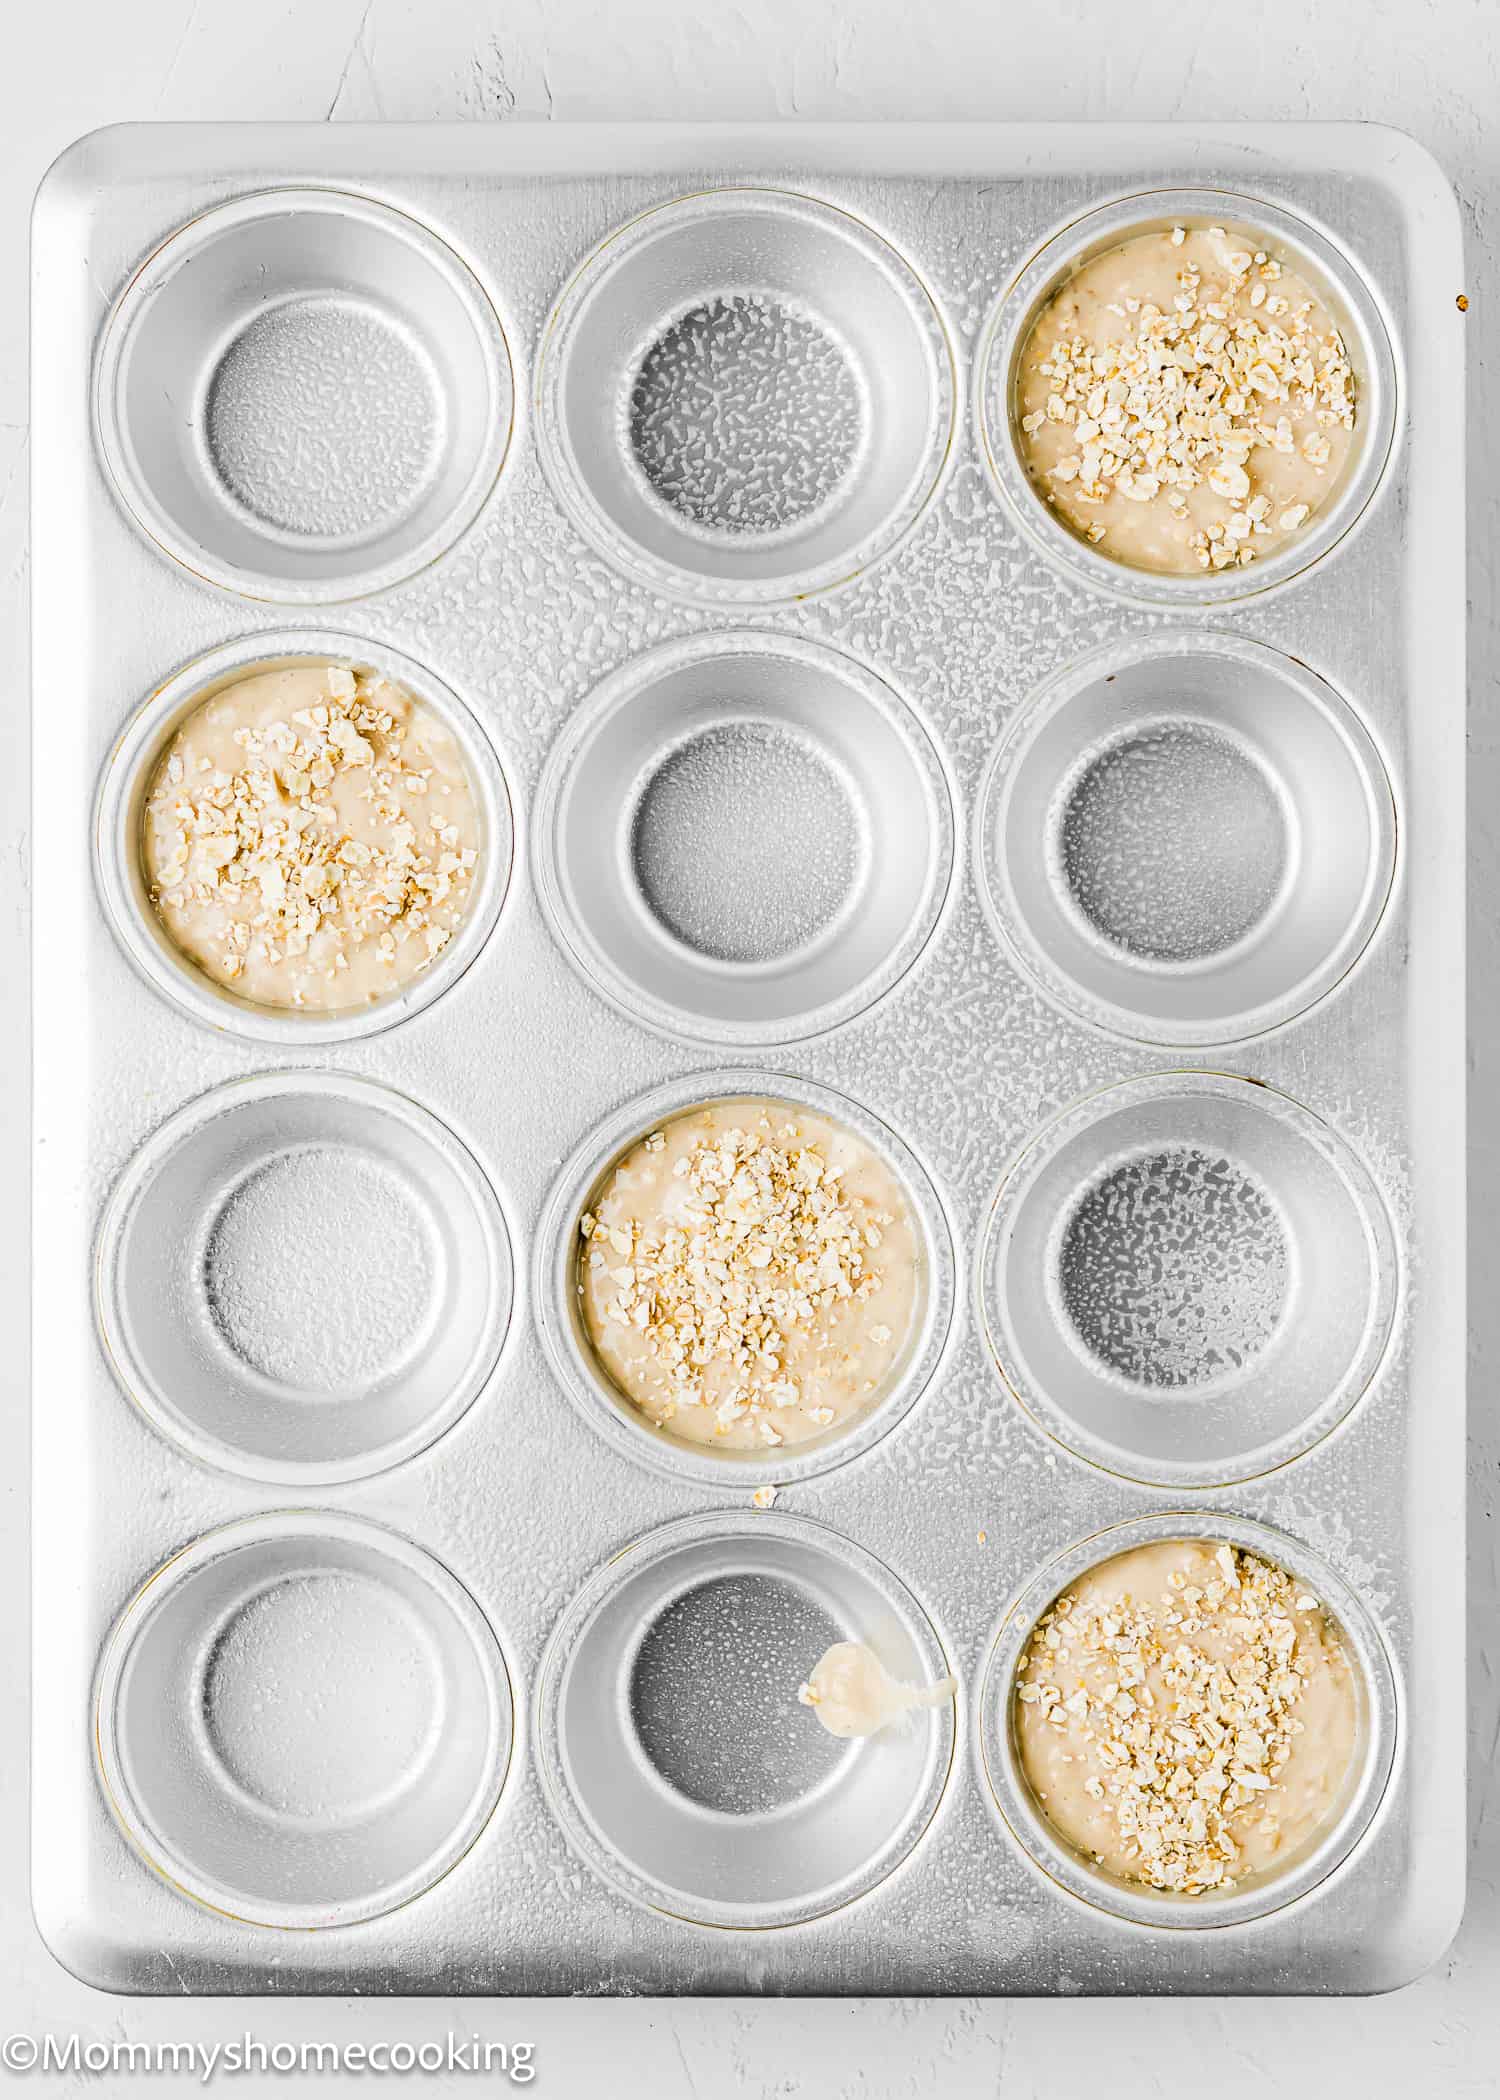 A muffin tin filled with easy oat muffins batter topped with more oats, made without eggs, dairy, or sugar.